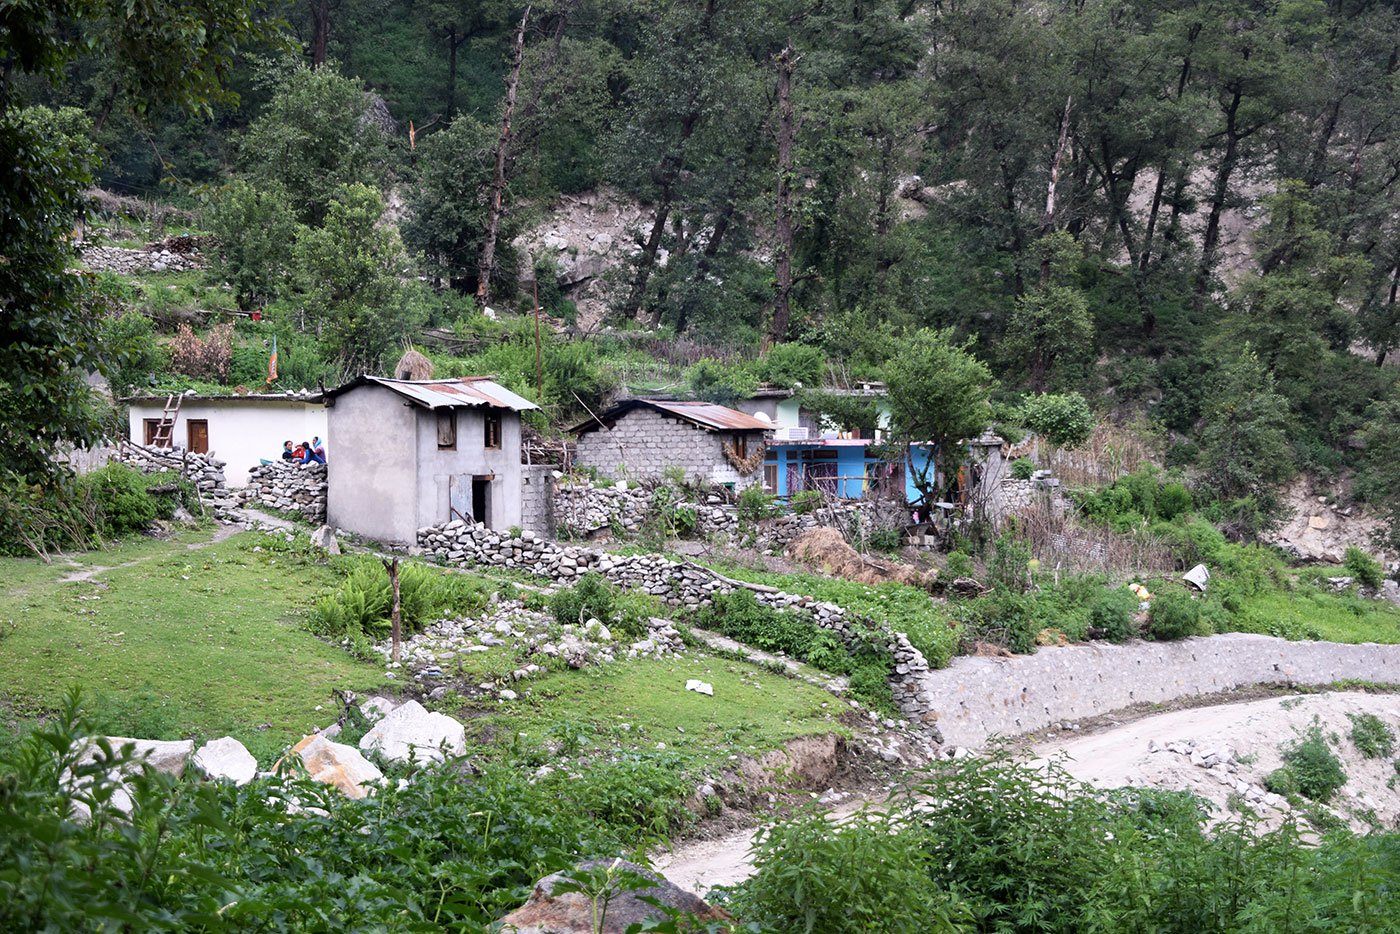 Keeda-jadi has transformed villages around Dharchula. New houses and shops have sprouted around